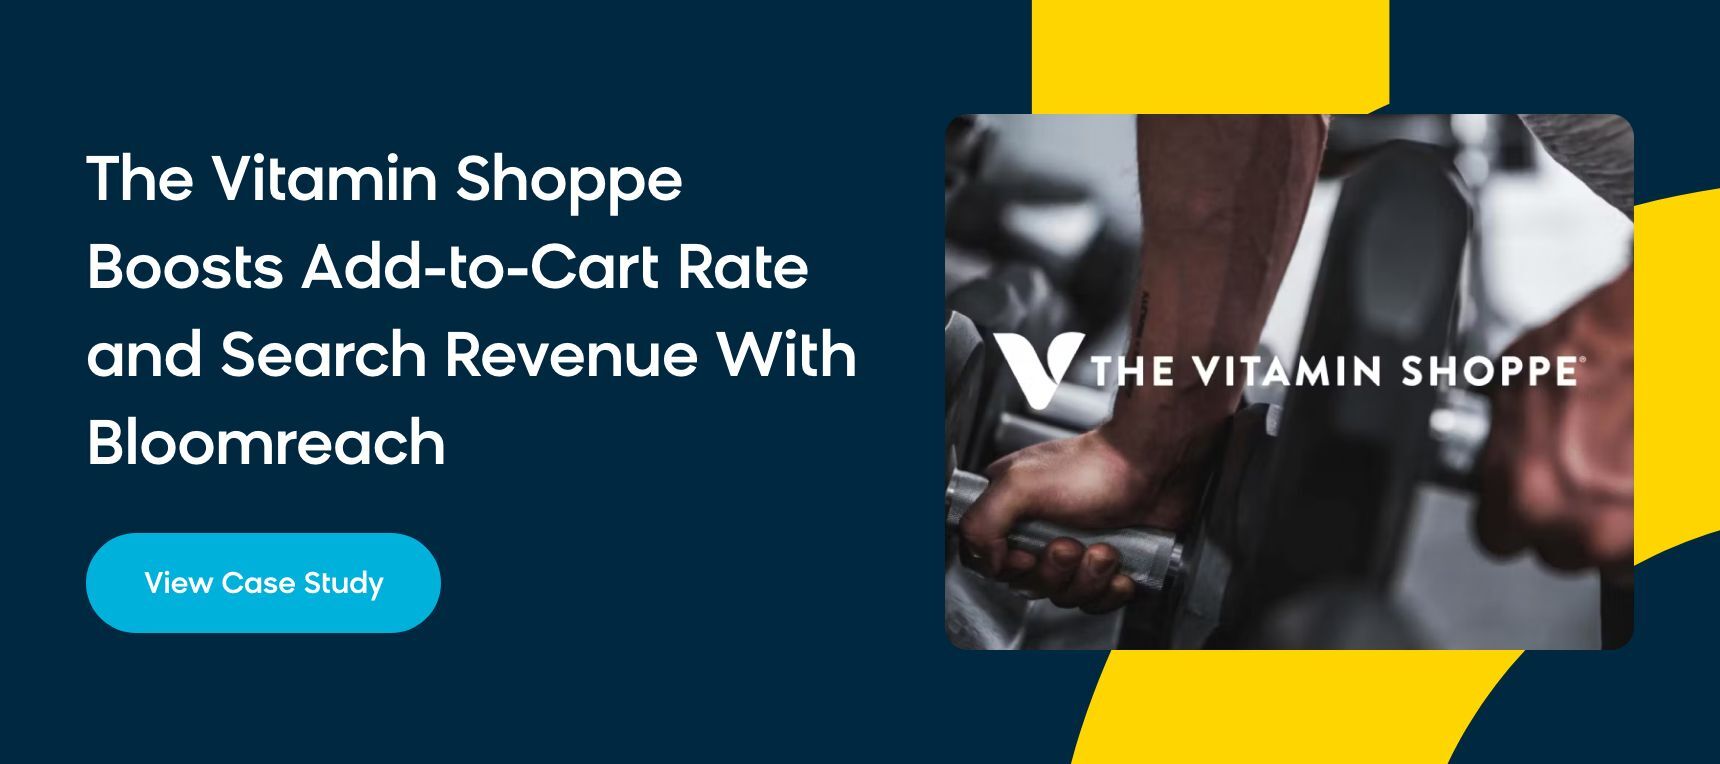 The Vitamin Shoppe case study with Bloomreach